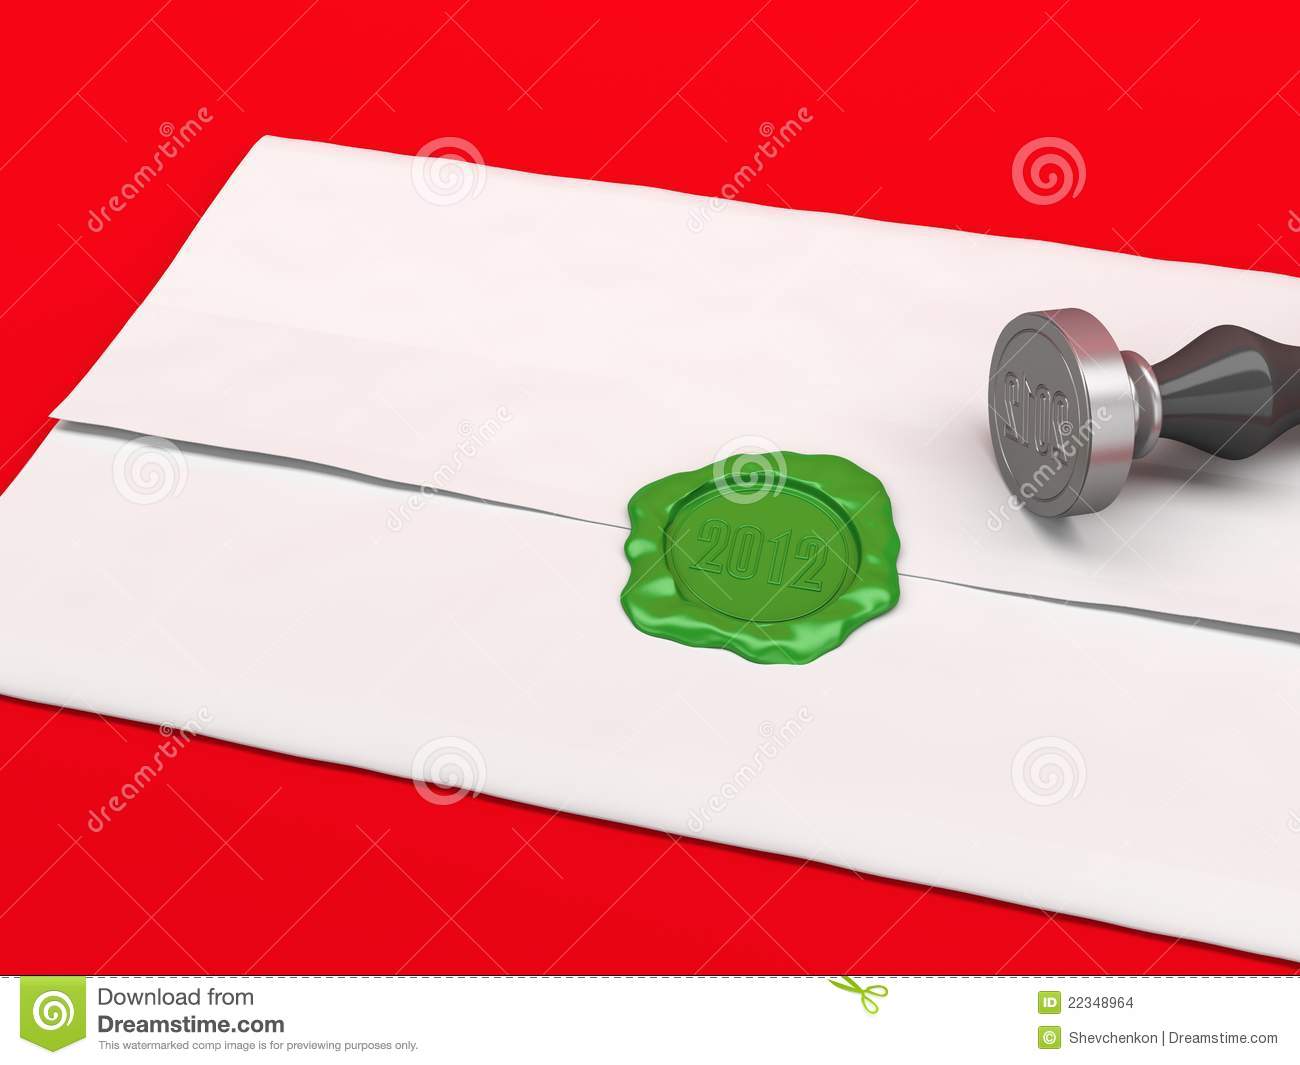 The Letter Sealed By A Sealing Wax Stamp  Stock Images   Image